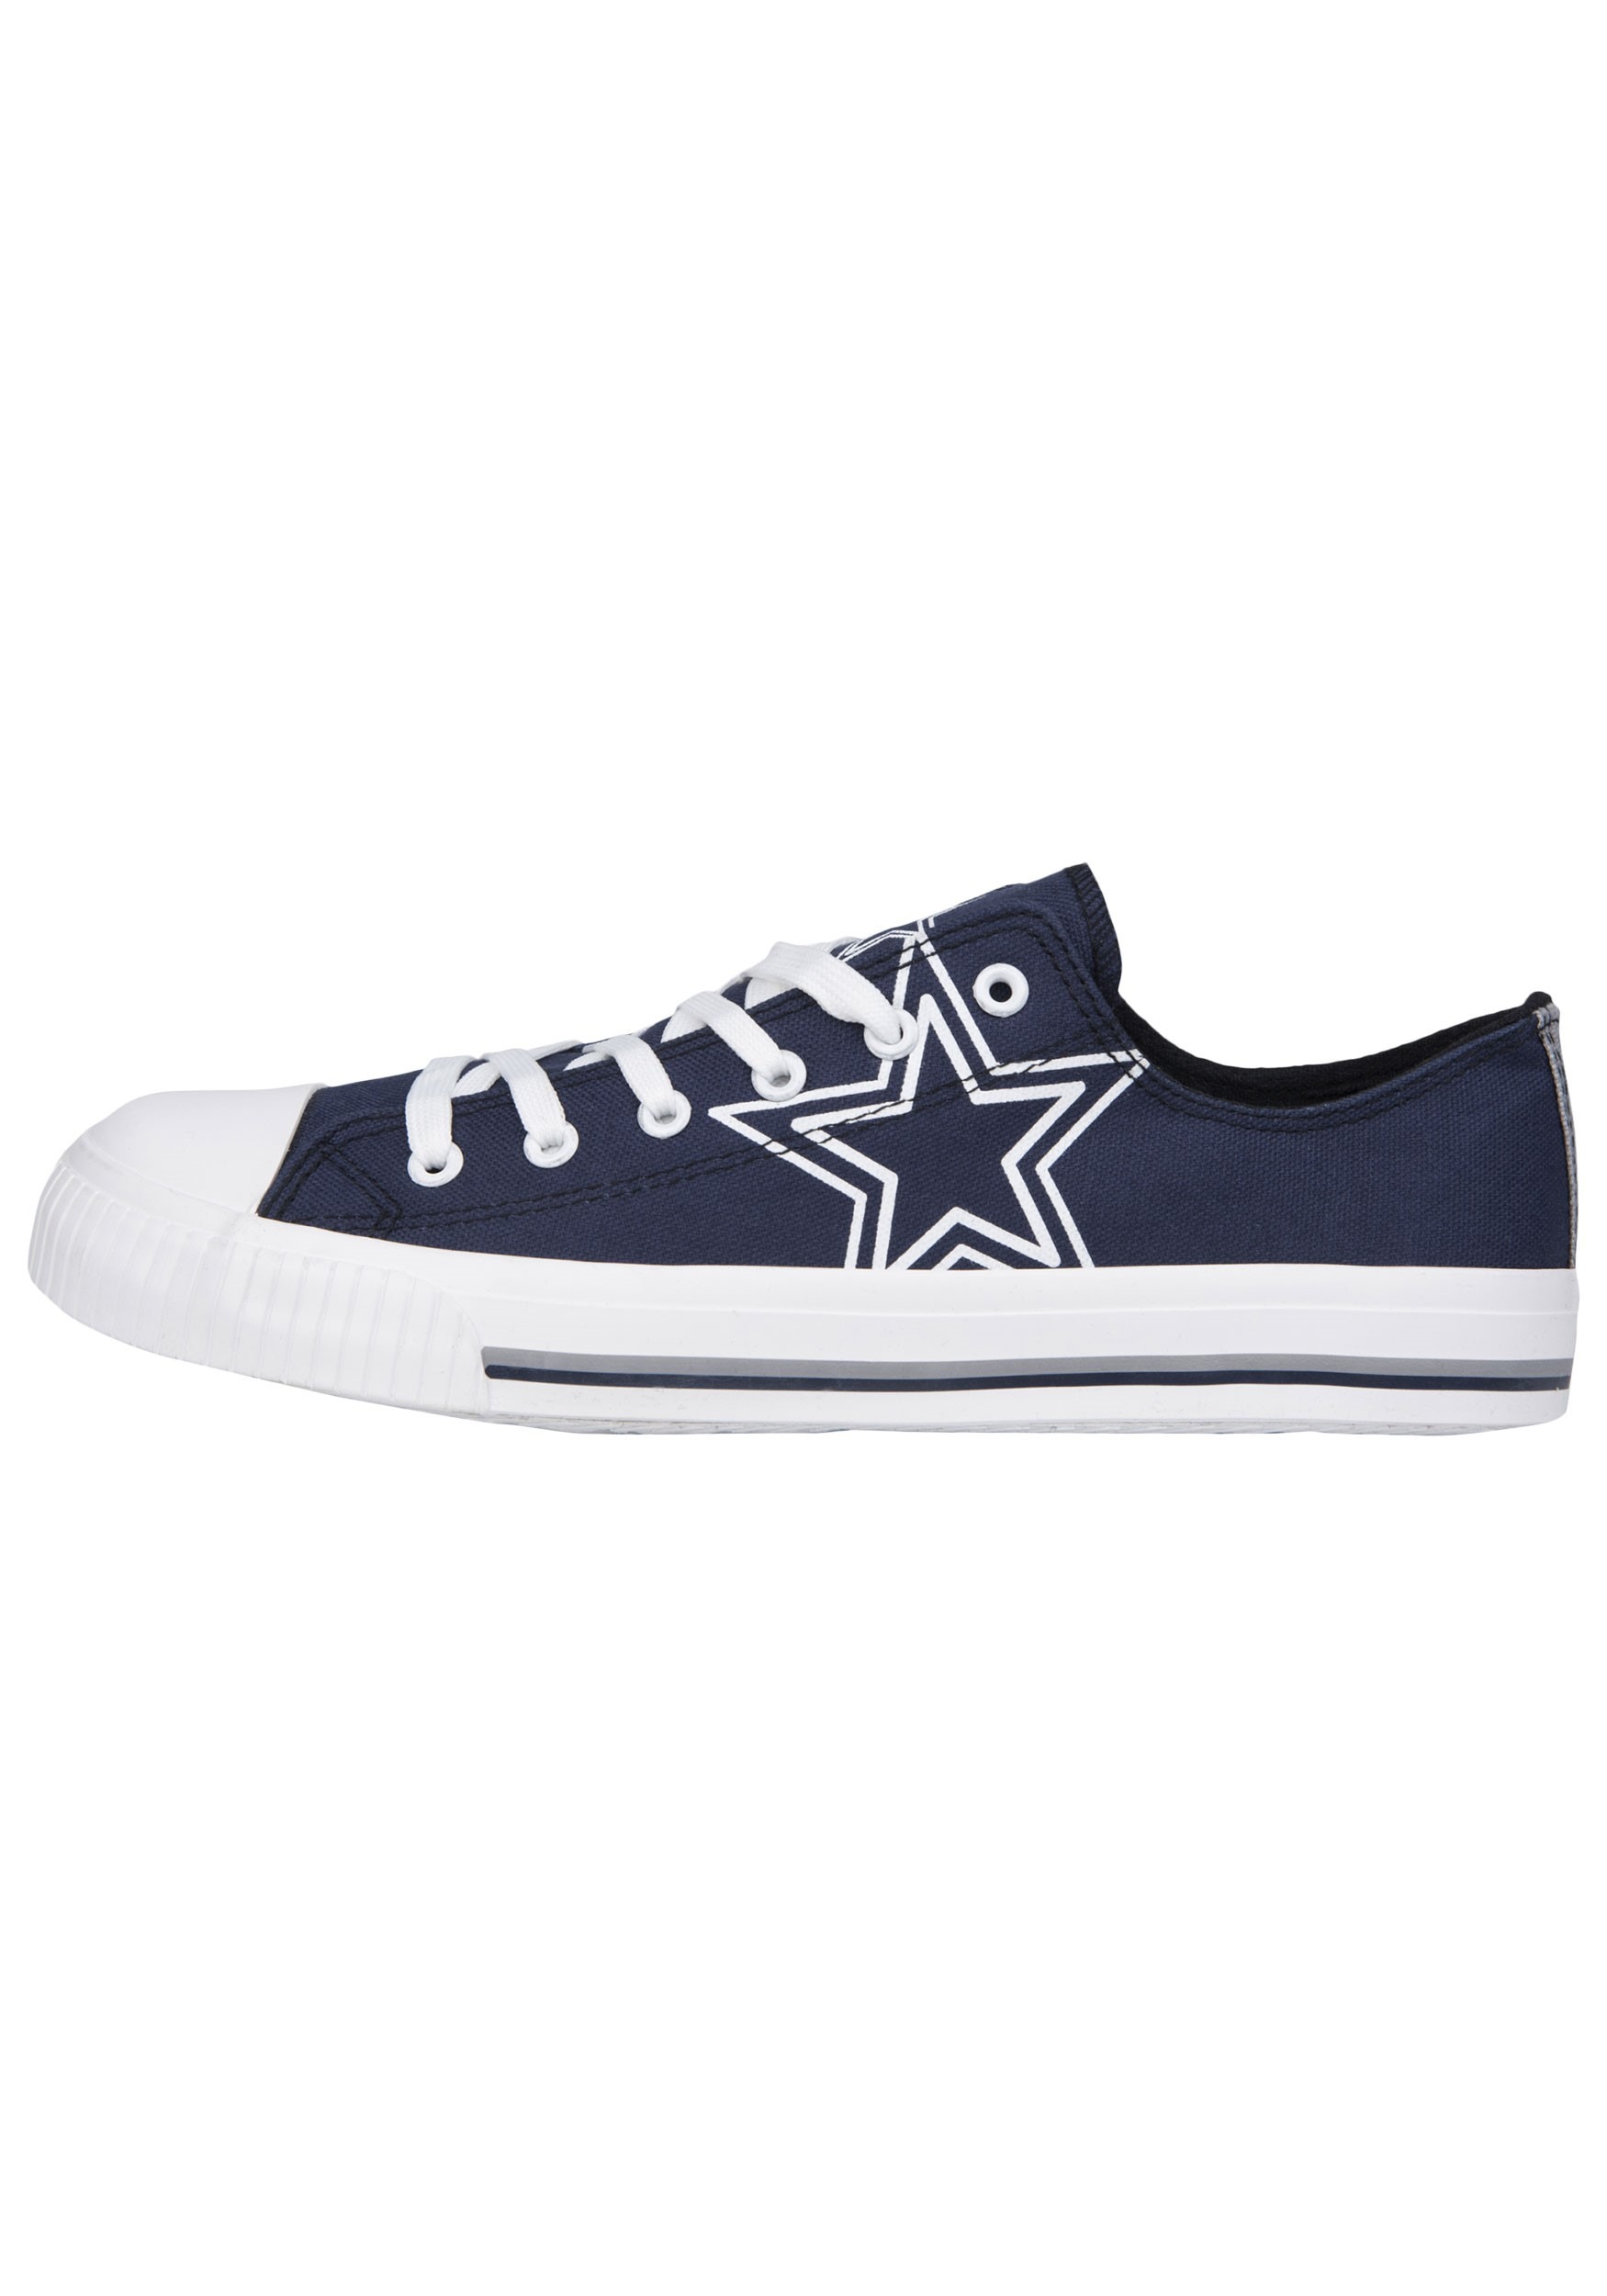 Dallas Cowboys Low Top Canvas Youth Shoes